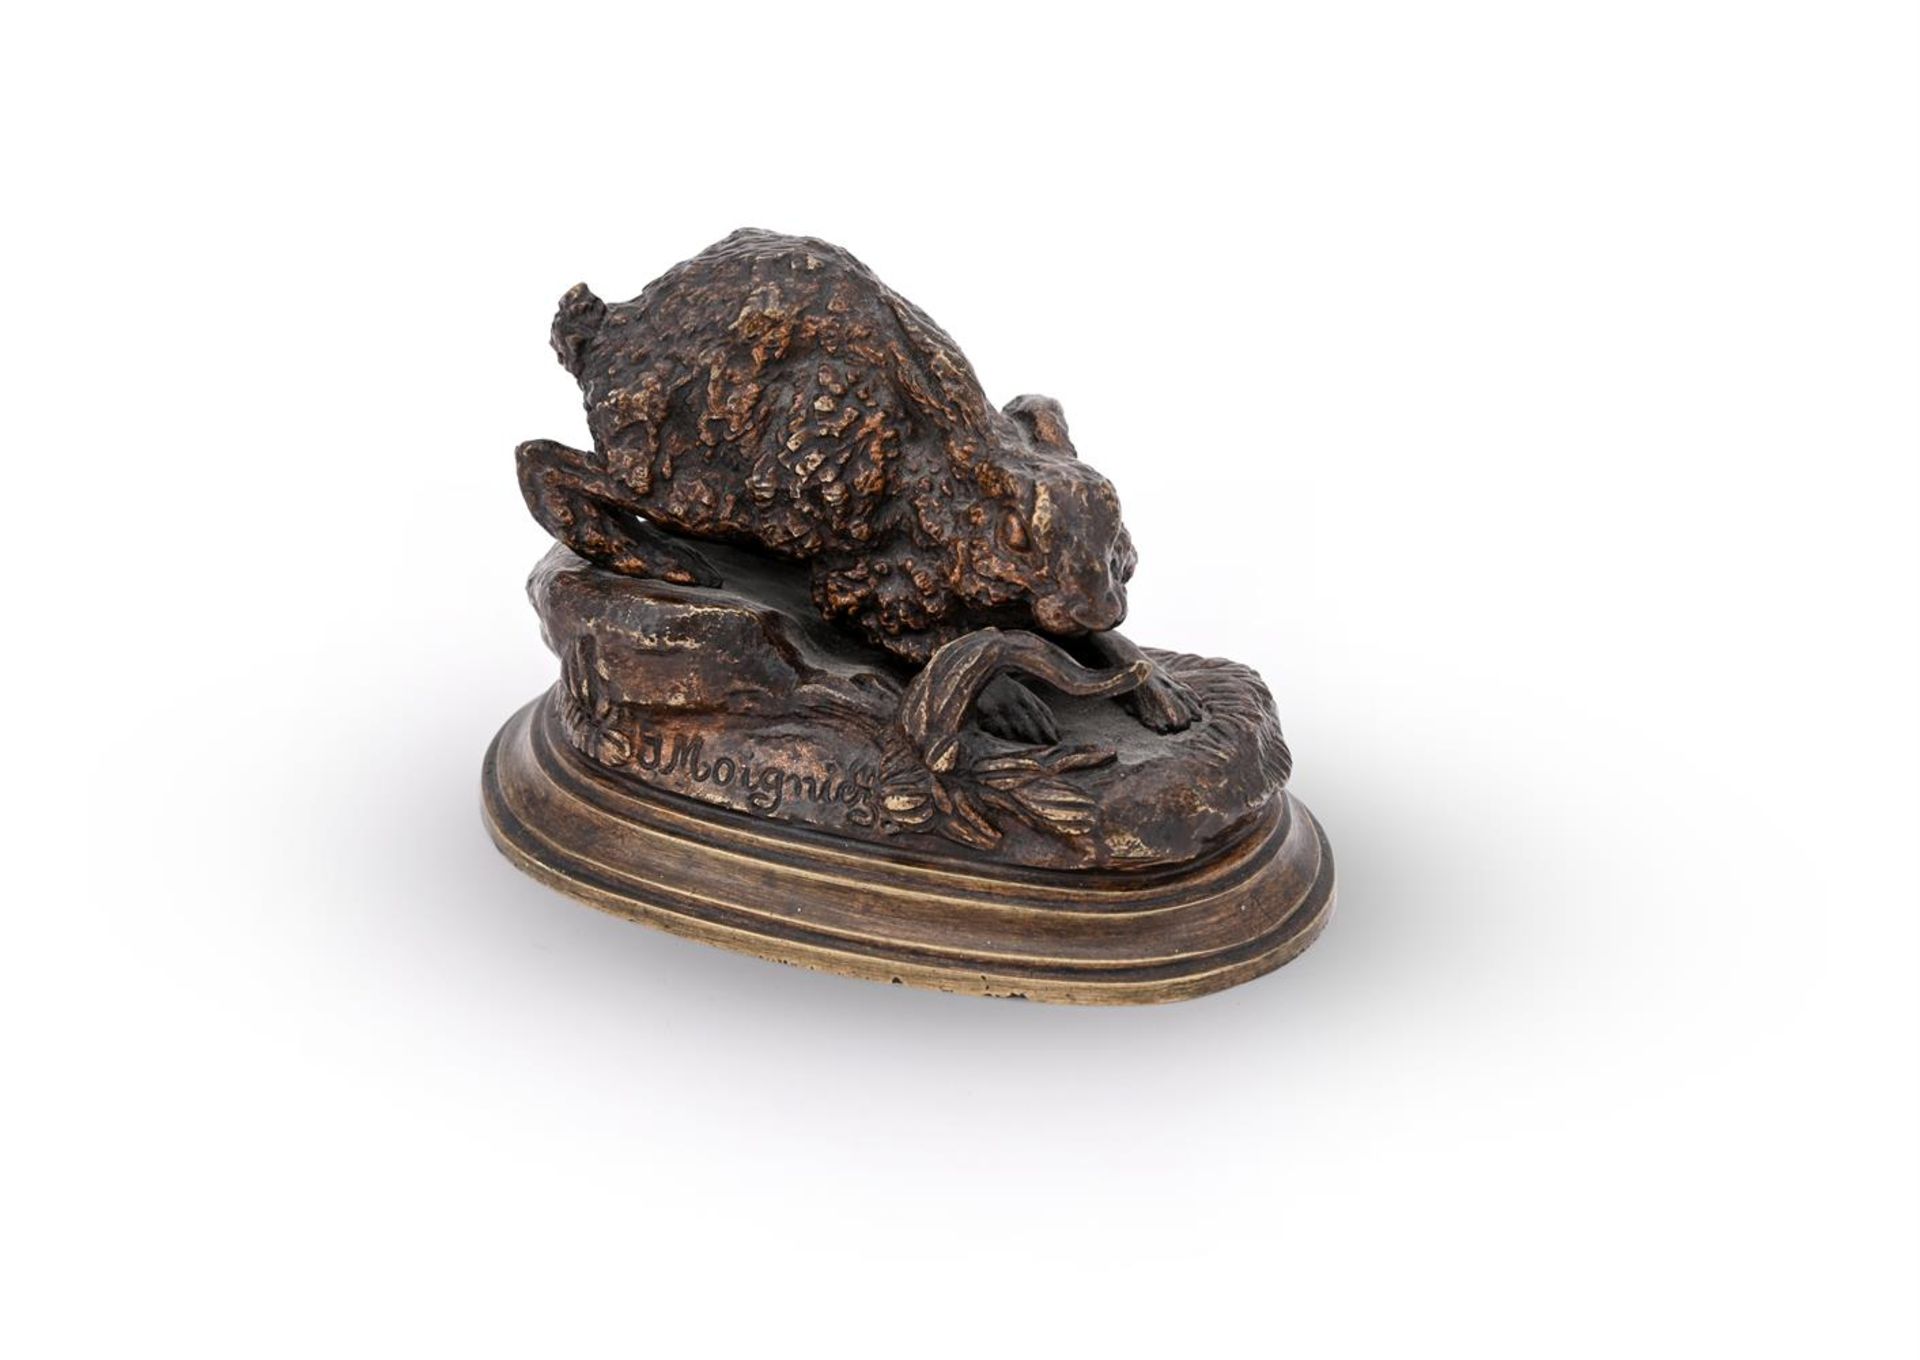 JULES MOIGNIEZ (FRENCH, 1835-1894), A BRONZE MODEL OF A CROUCHING HARE - Image 2 of 5